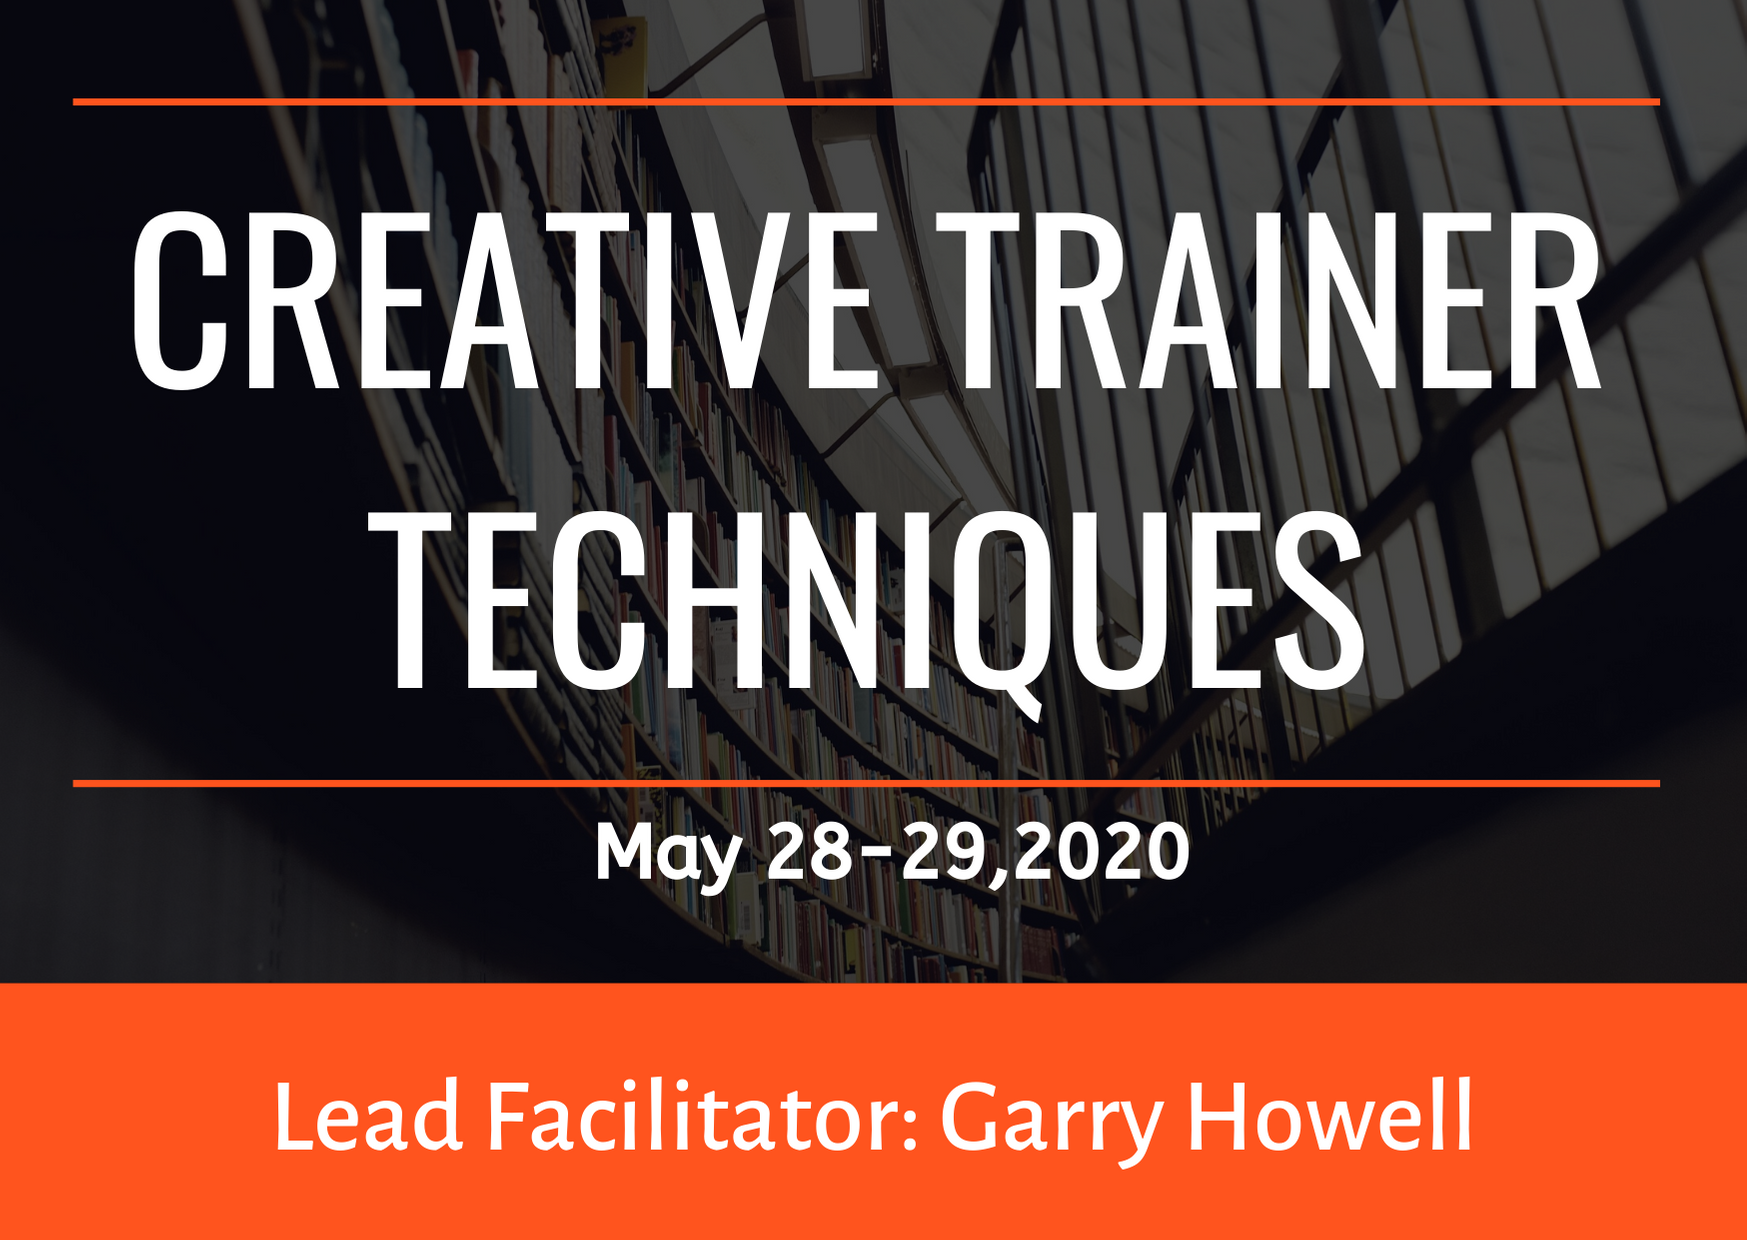 Upcoming Event - Creative Trainer Techniques